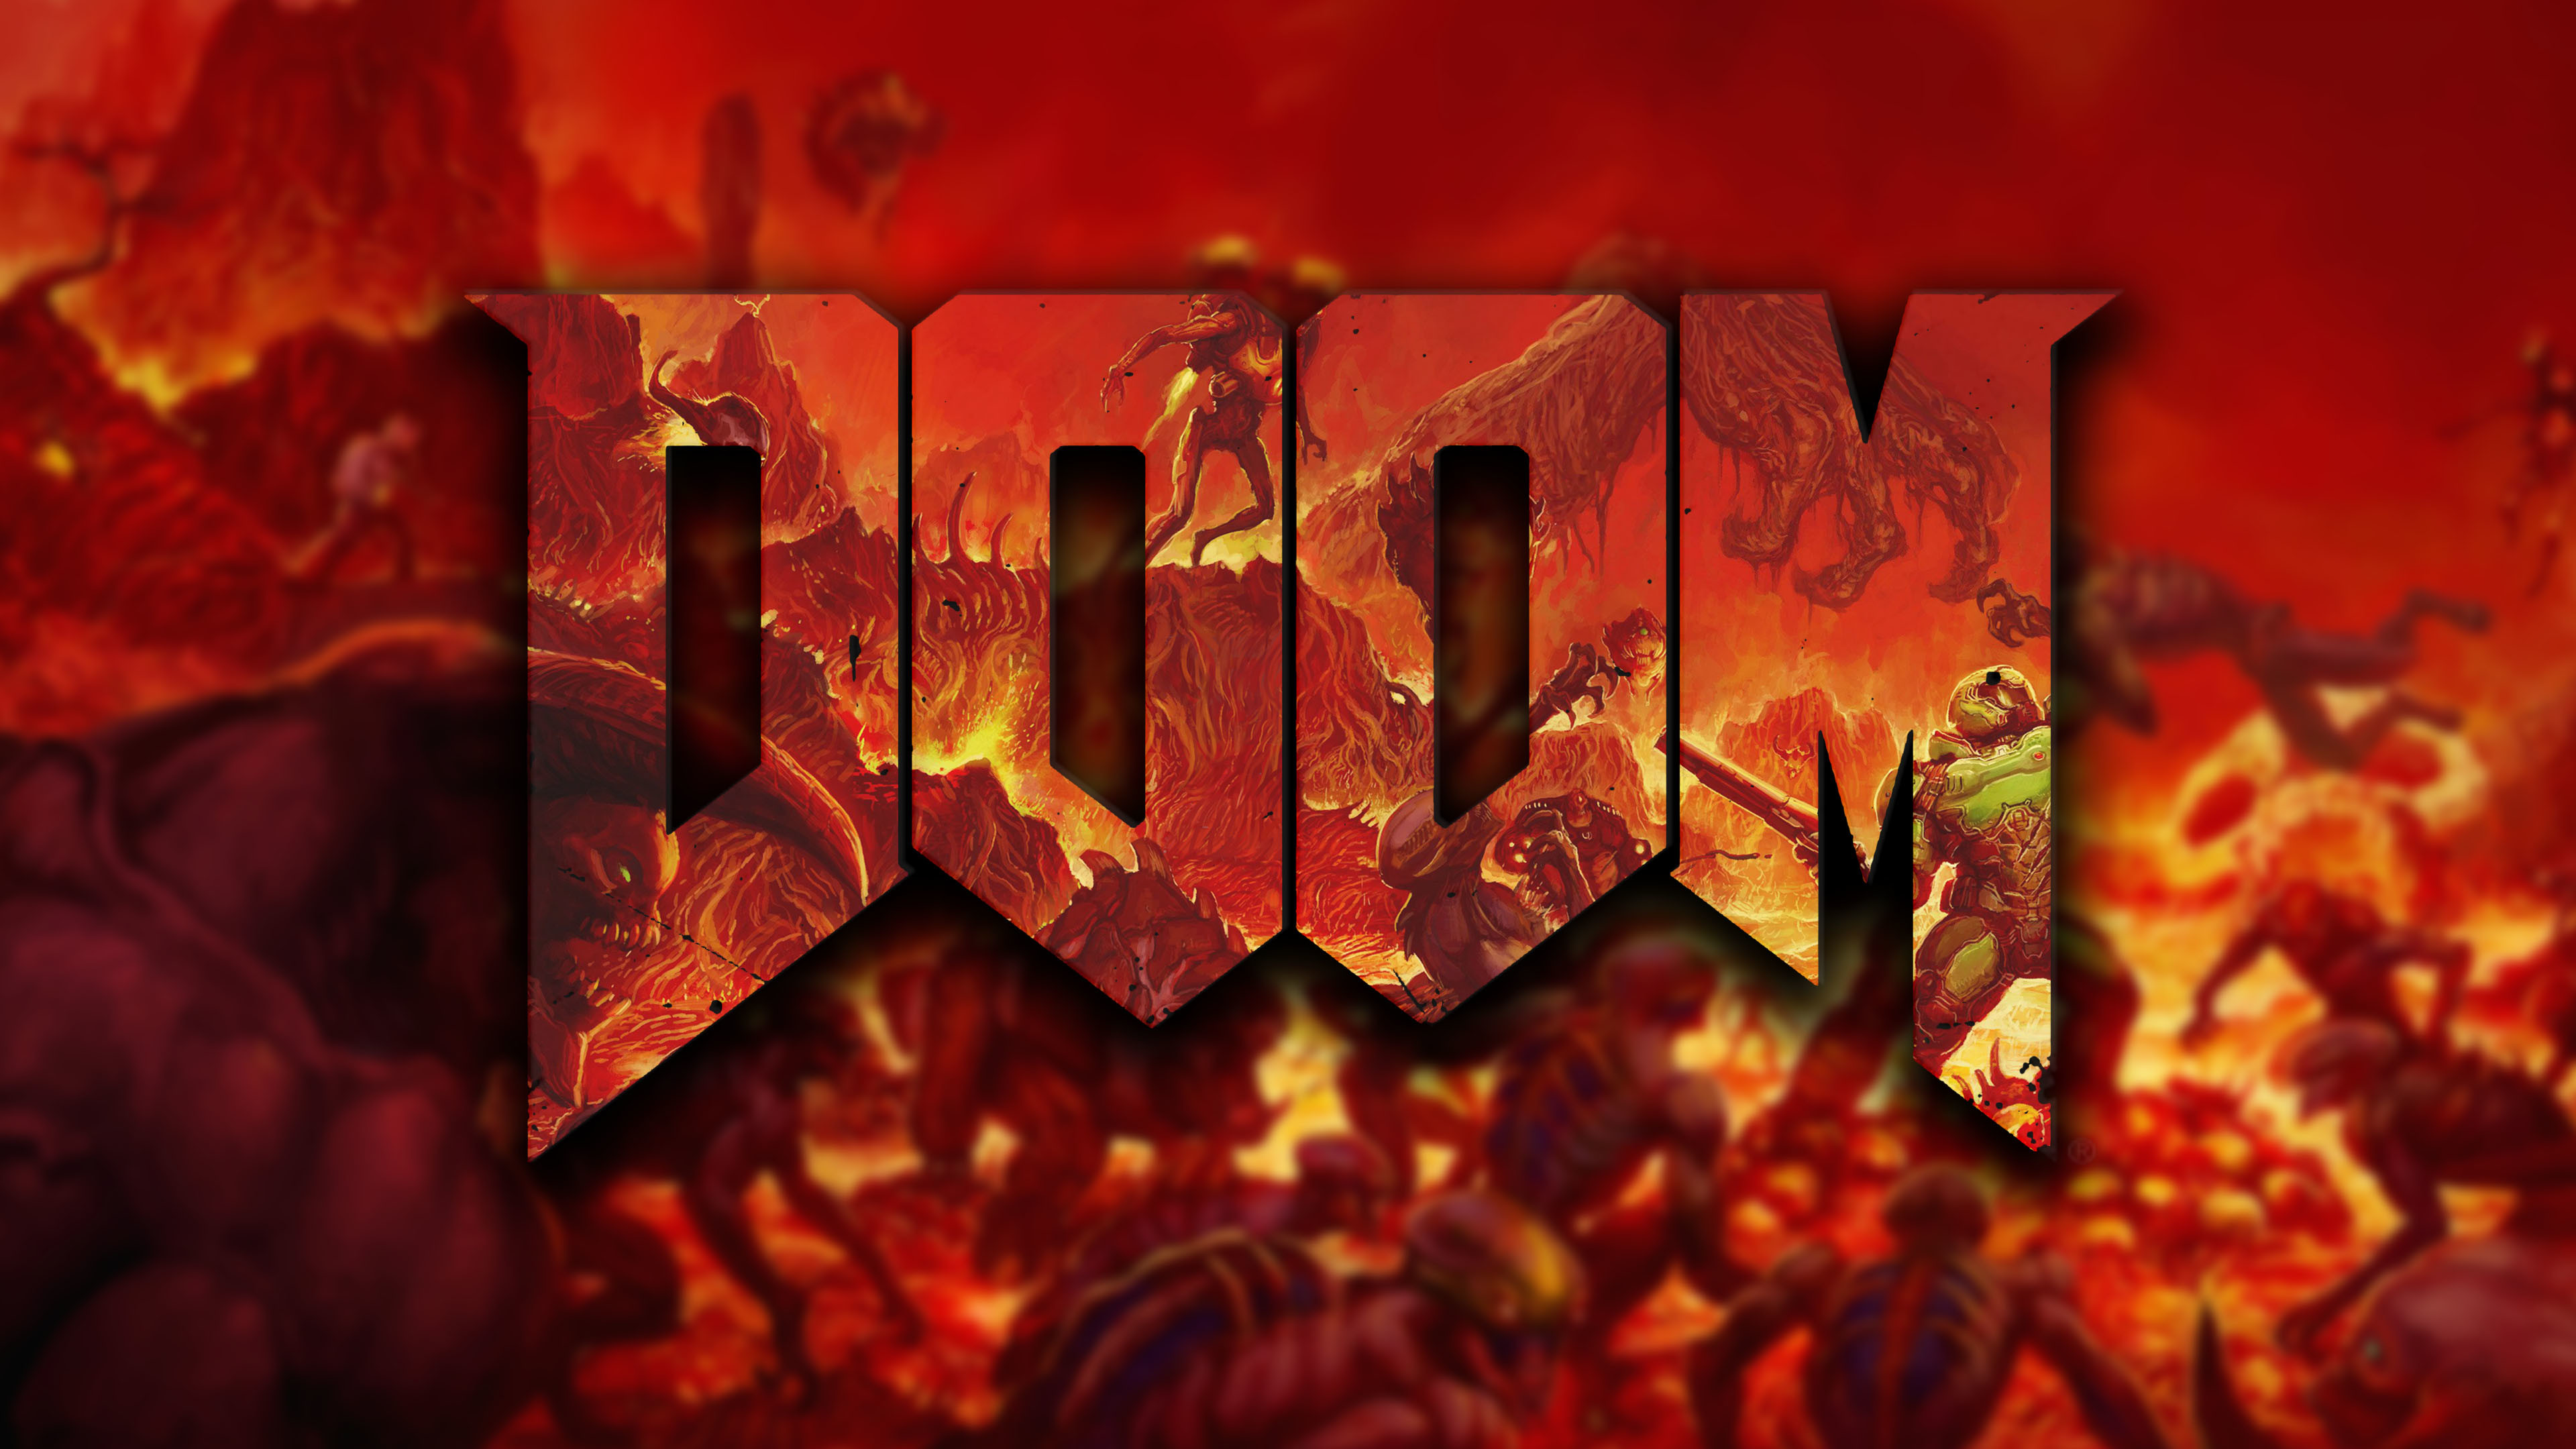 3840x2160 I Made Wallpaper Some Of You might like [DOOM]